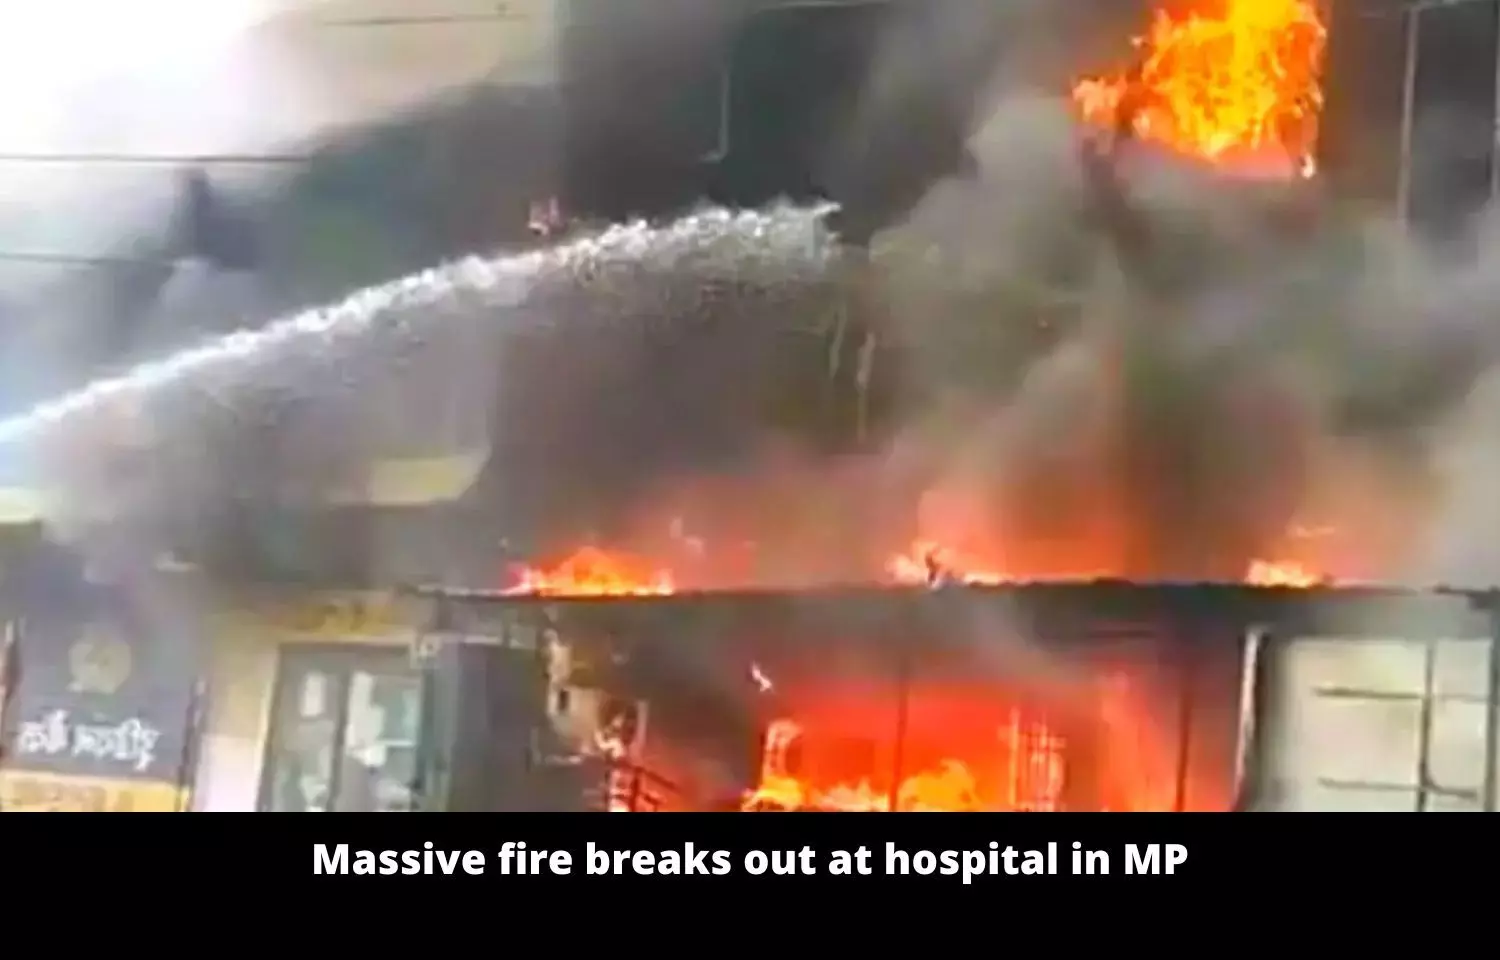 Massive fire breaks out at MP hospital